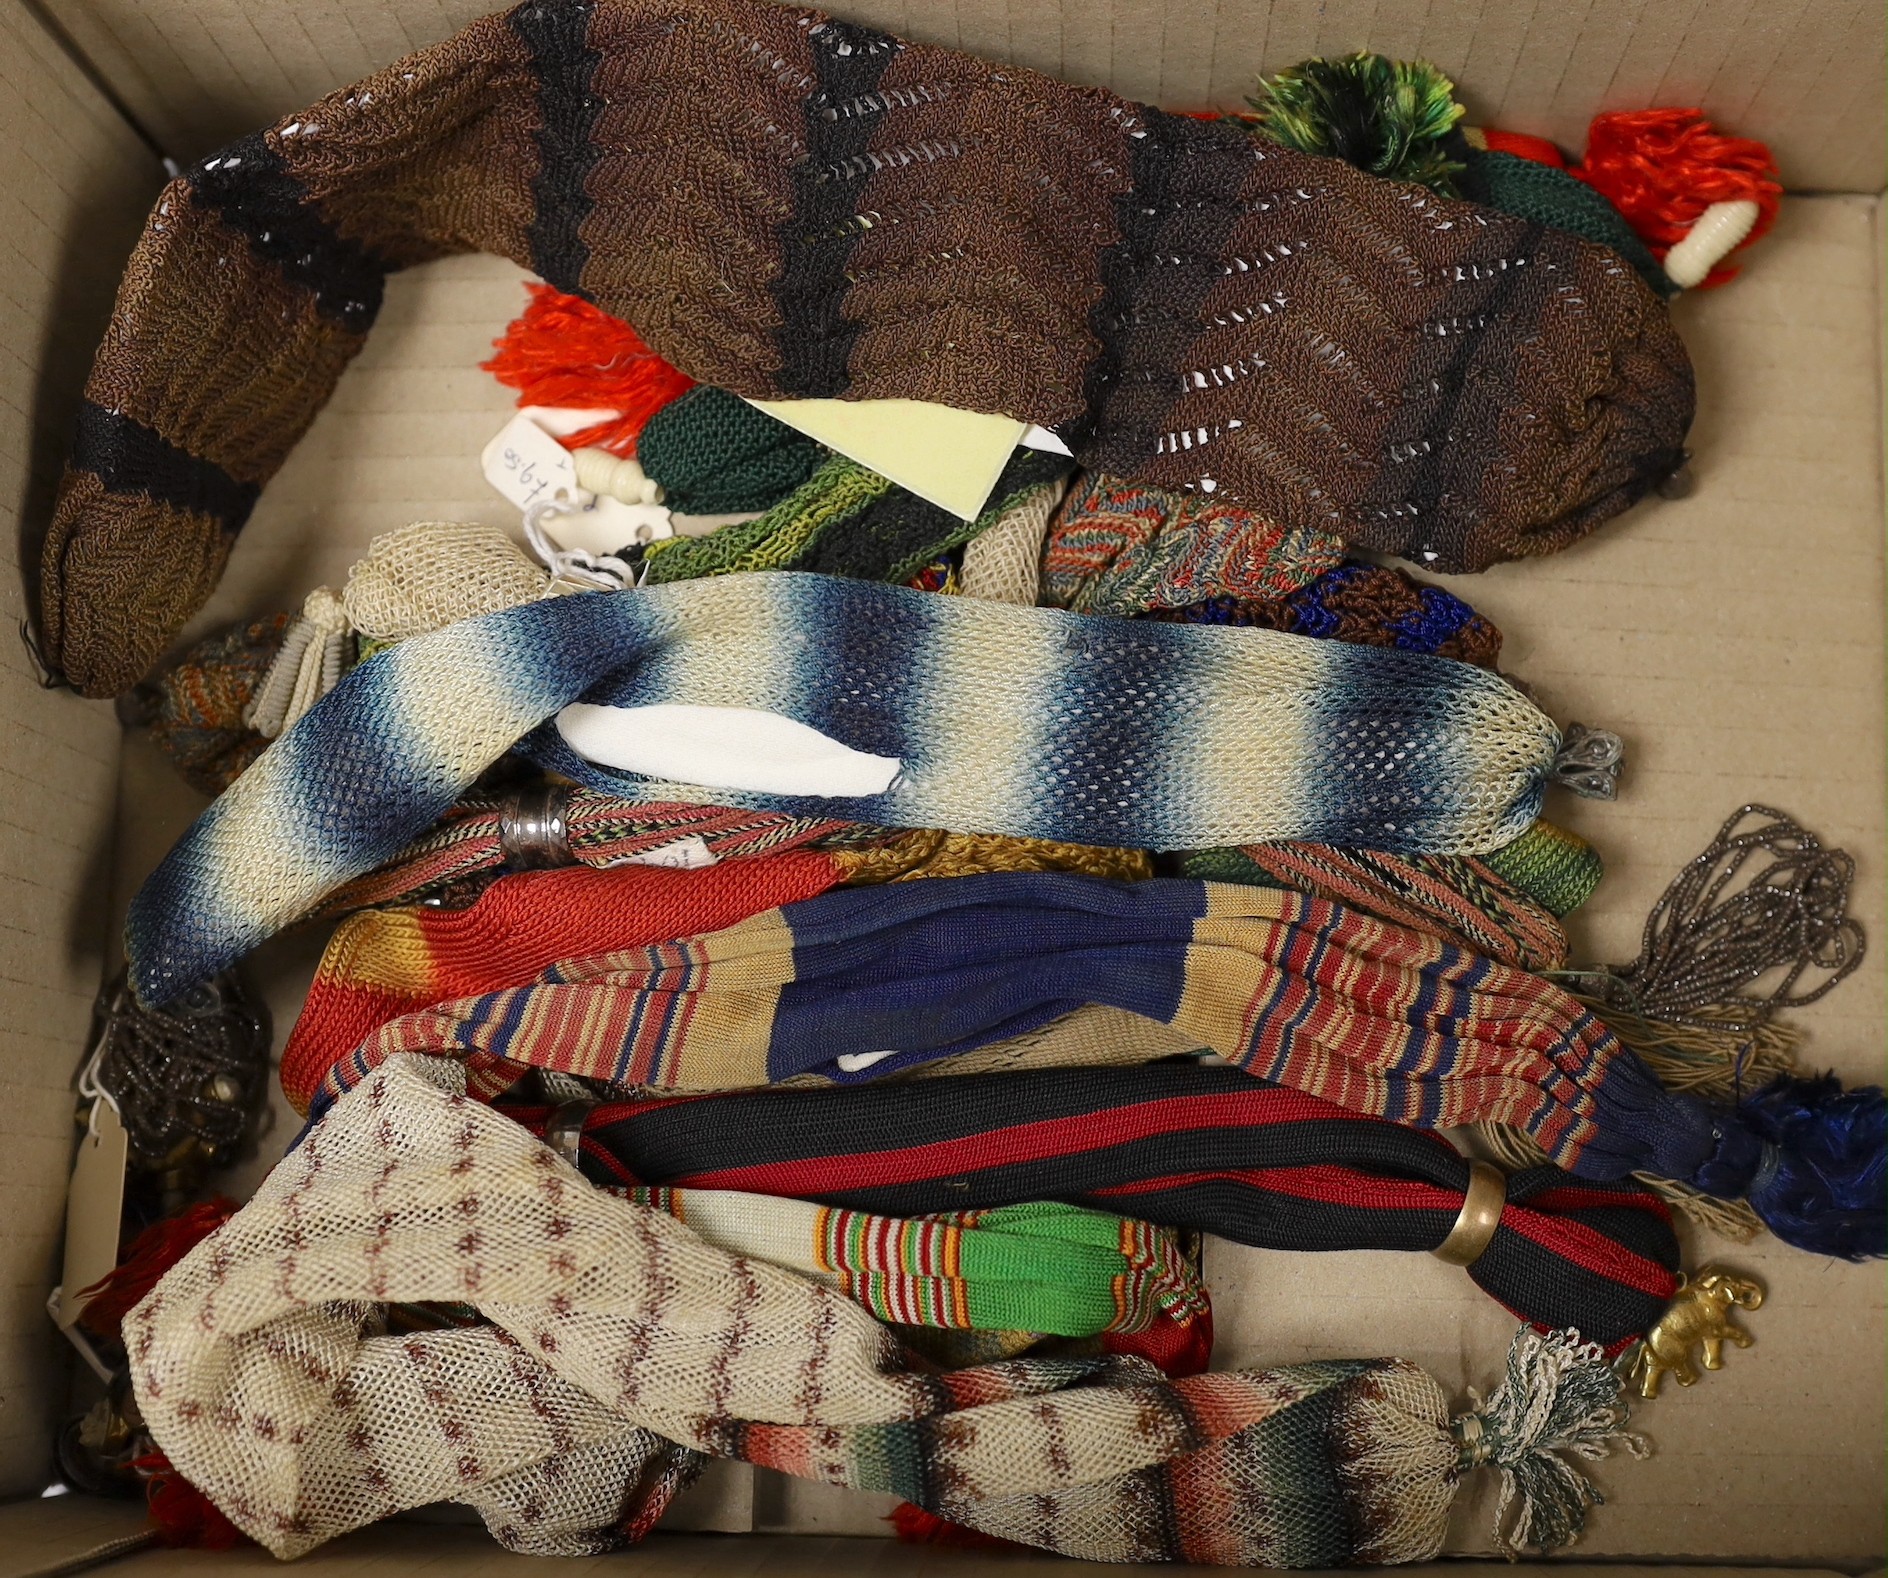 Sixteen mixed knitted misers purses, 19th century, some with Fairisle design, striped, and one novelty purse designed as a sock